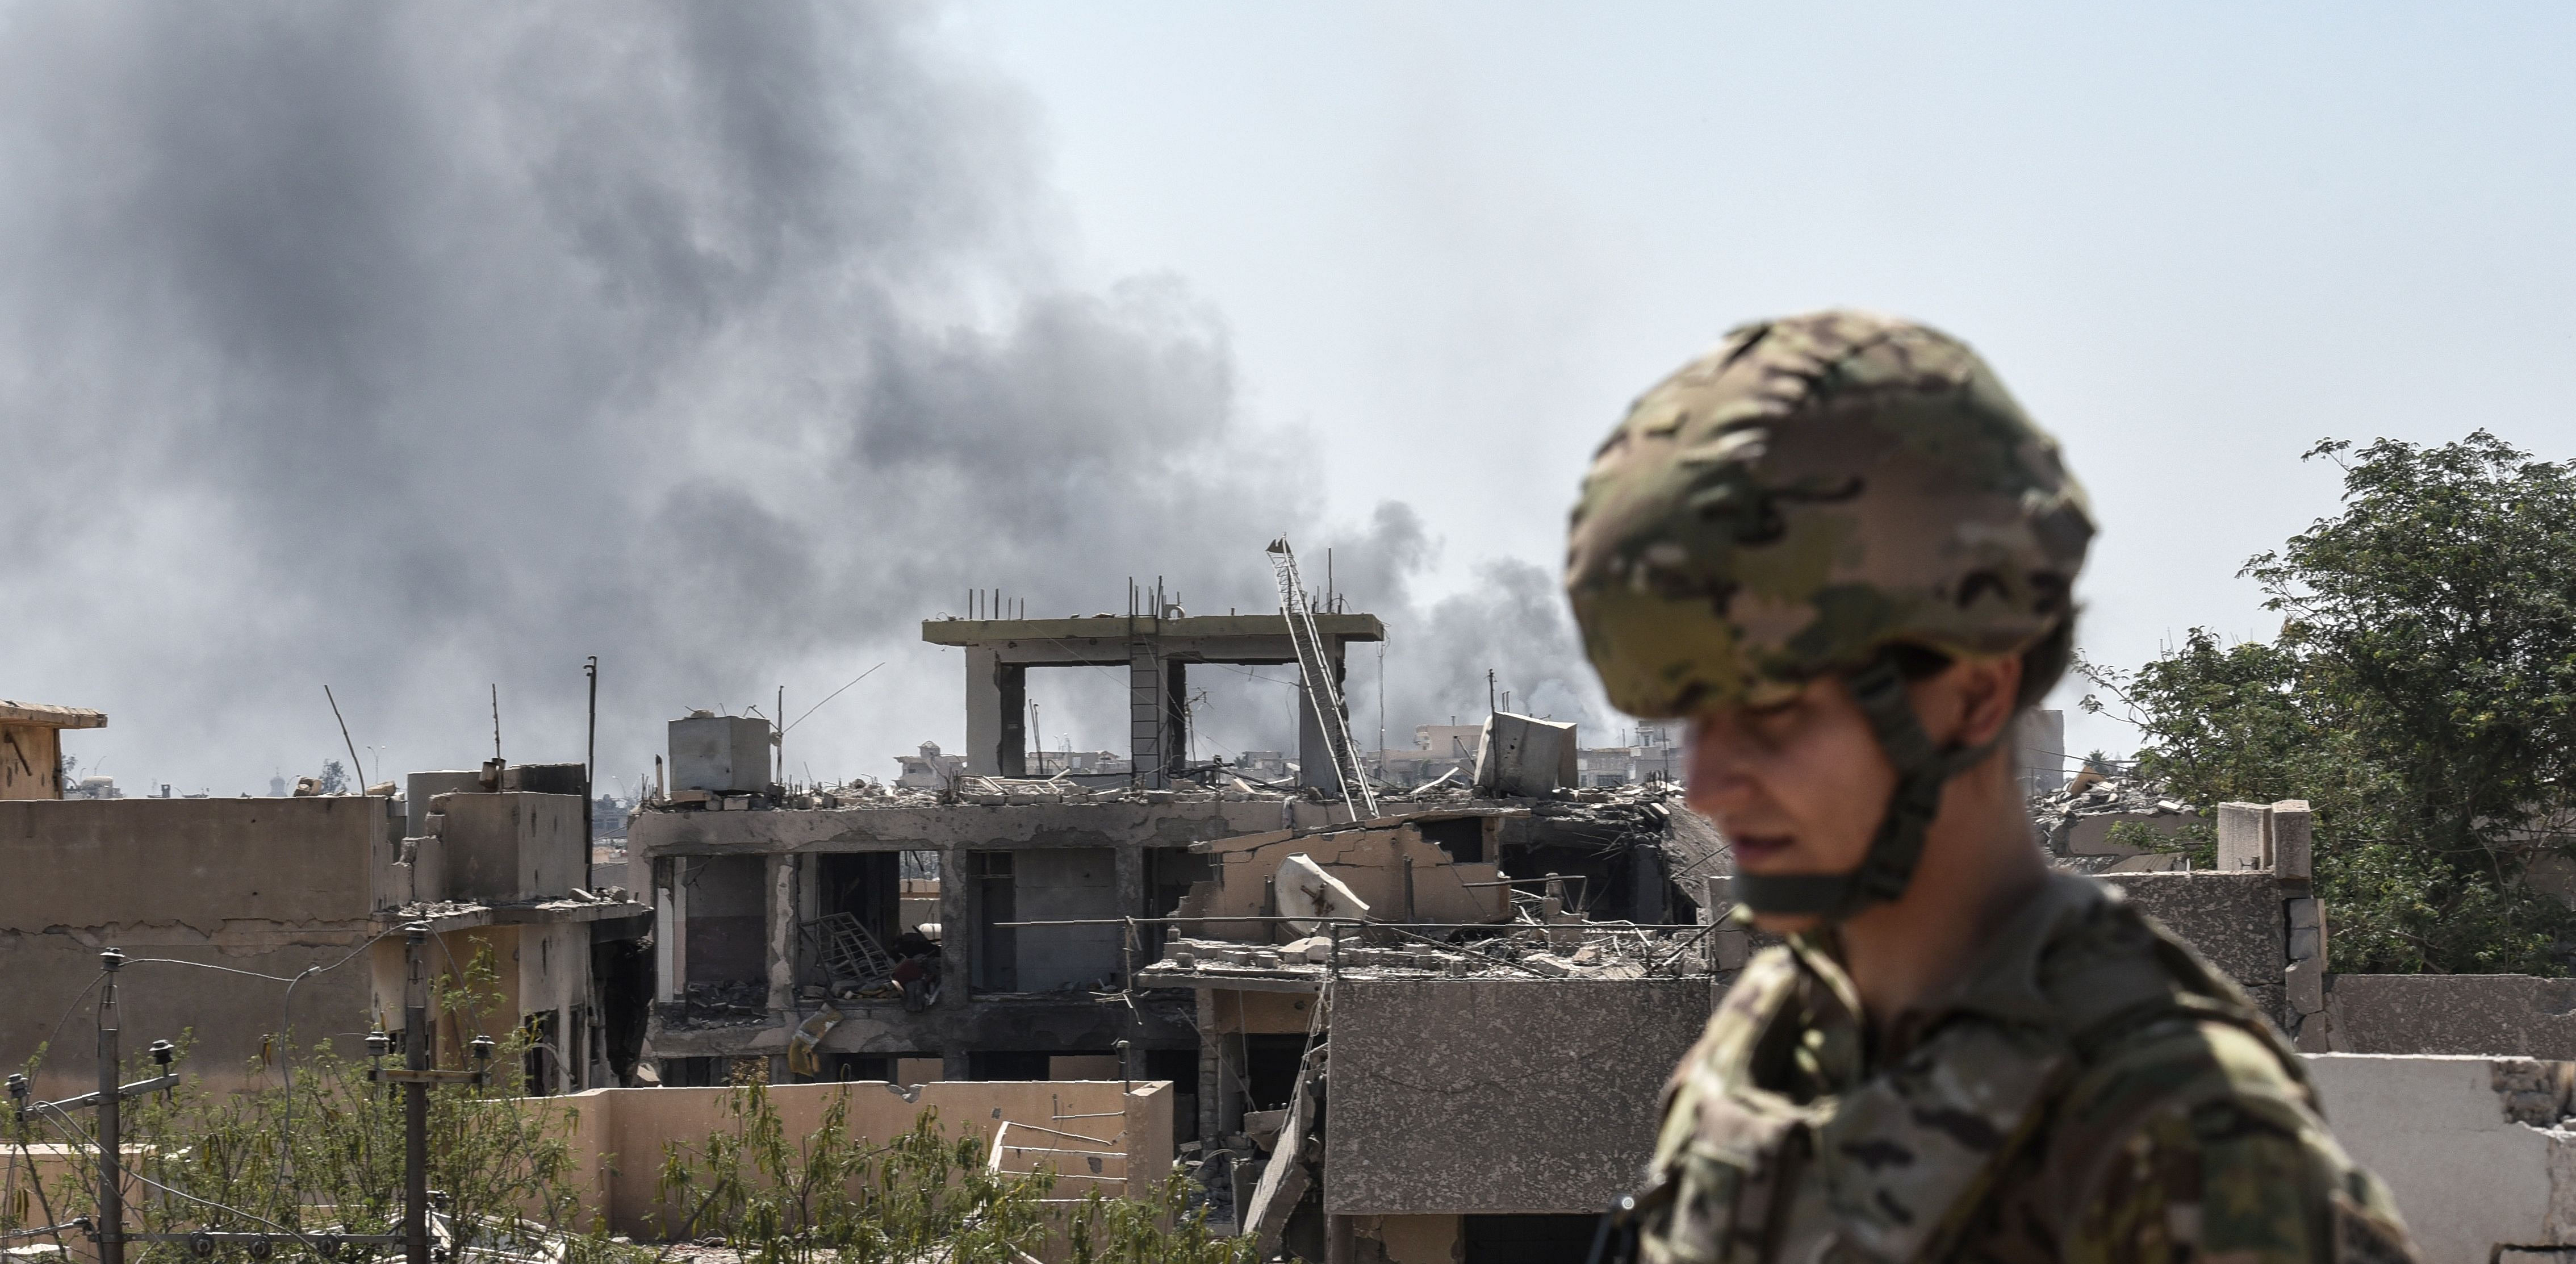 A US soldier advising Iraqi forces is seen in the city of Mosul on June 21, 2017, during the ongoing offensive by Iraqi troops to retake the last district still held by the Islamic State (IS) group. Credit: AFP